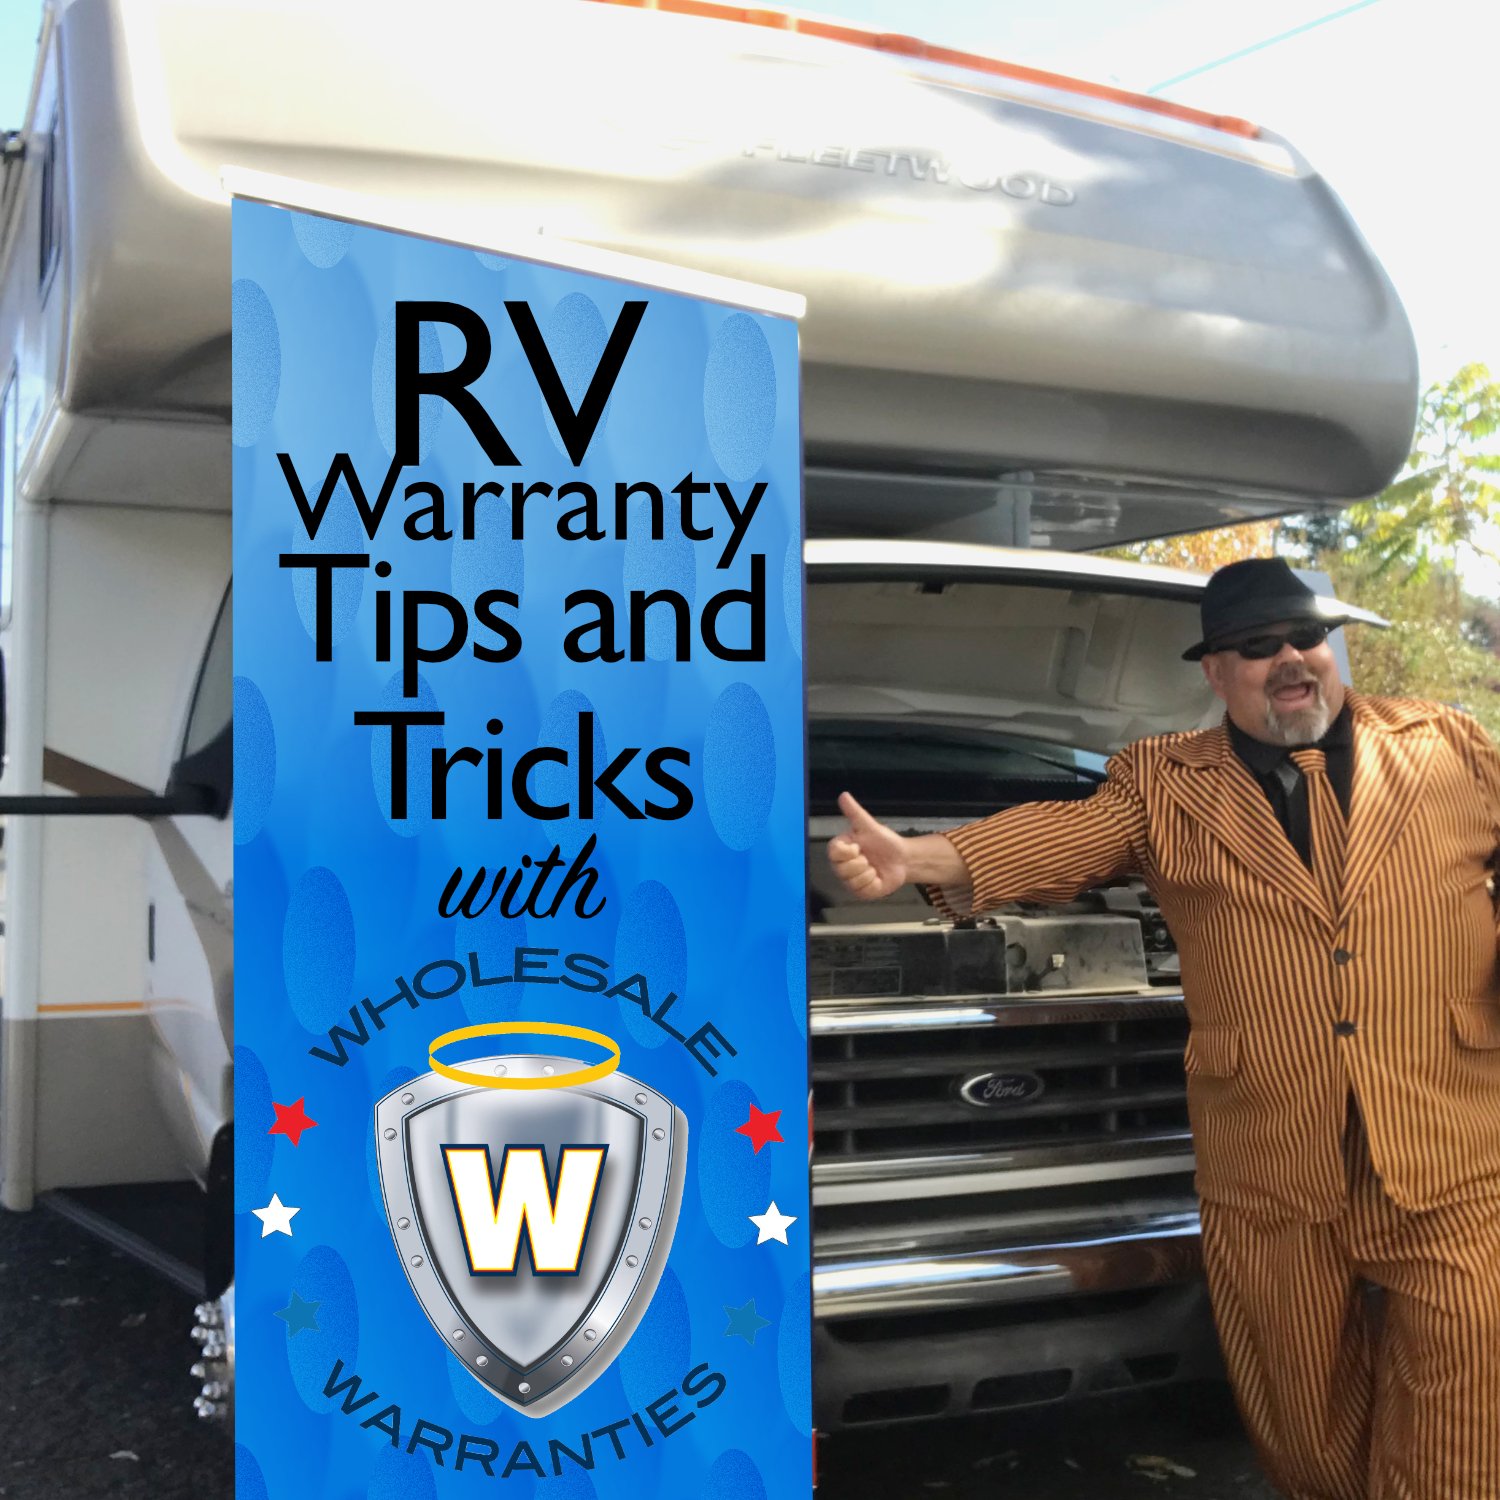 RV extended warranties - what you need to know to save money and get the right plan with Wholesale Warranties